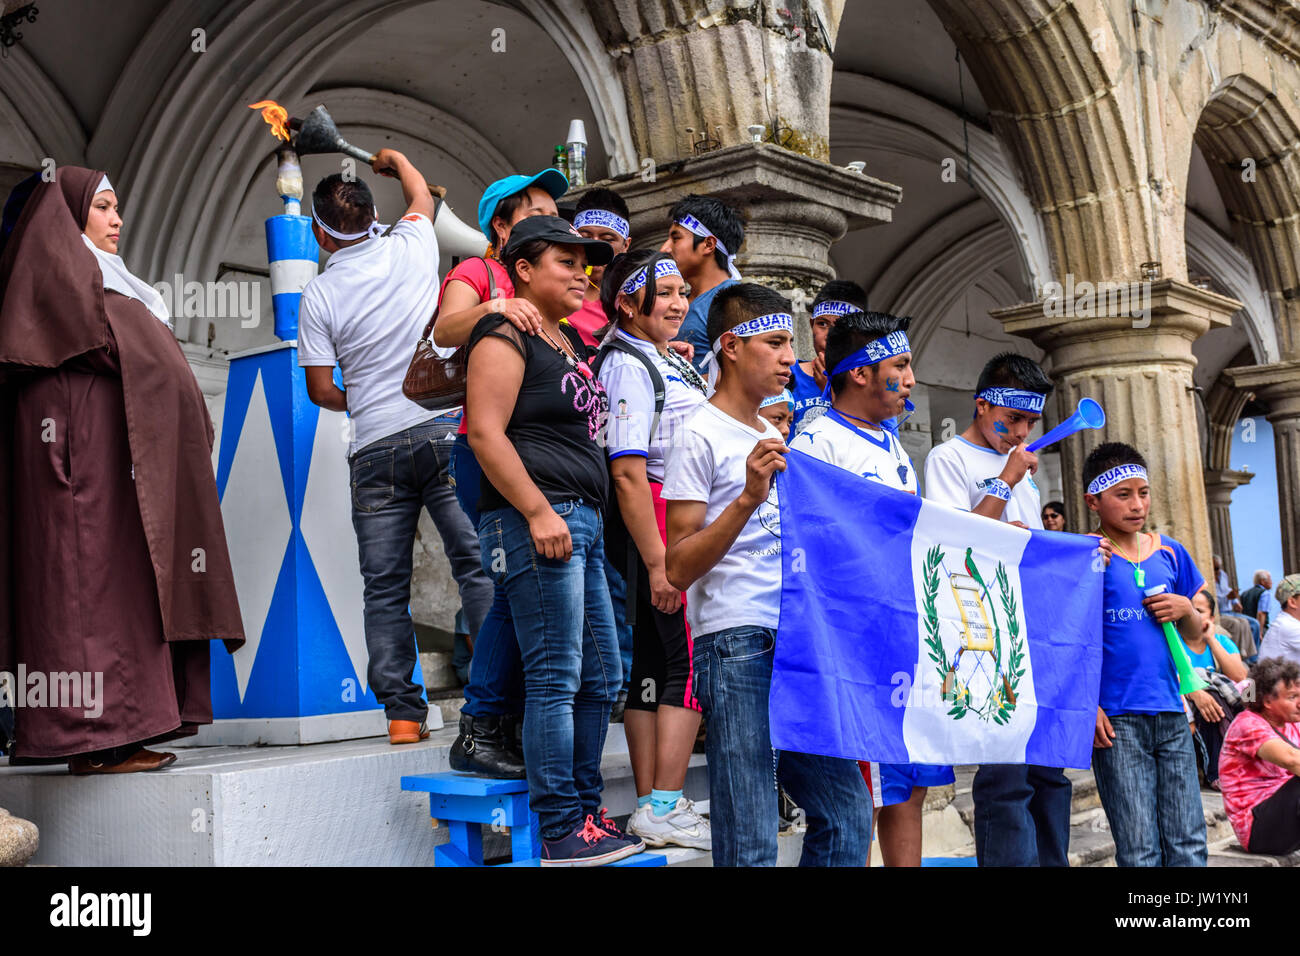 Antigua, Guatemala - September 14, 2015: Locals light torch & pose for photos with Guatemalan flag during Guatemalan Independence Day celebrations Stock Photo